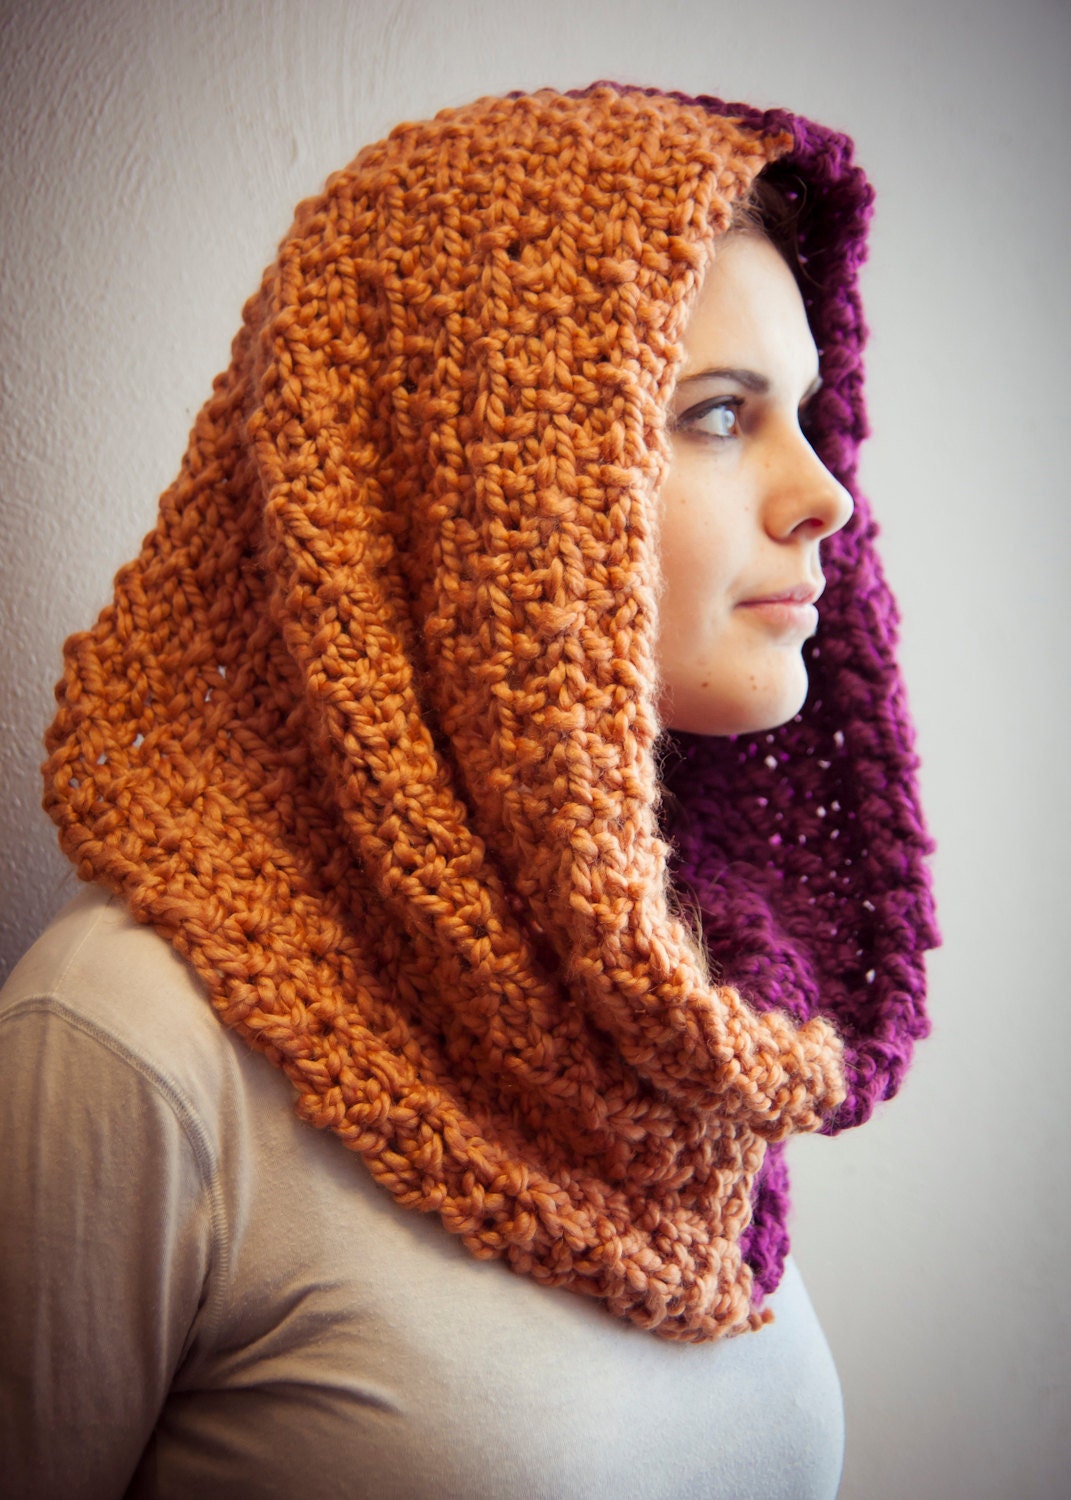 Oversized Knitted Cowl, Two Toned Purple and Orange Cowl, Cozy Scarf, Chunky Infinity Scarf, Winter Wear - EmbraceTheLamb